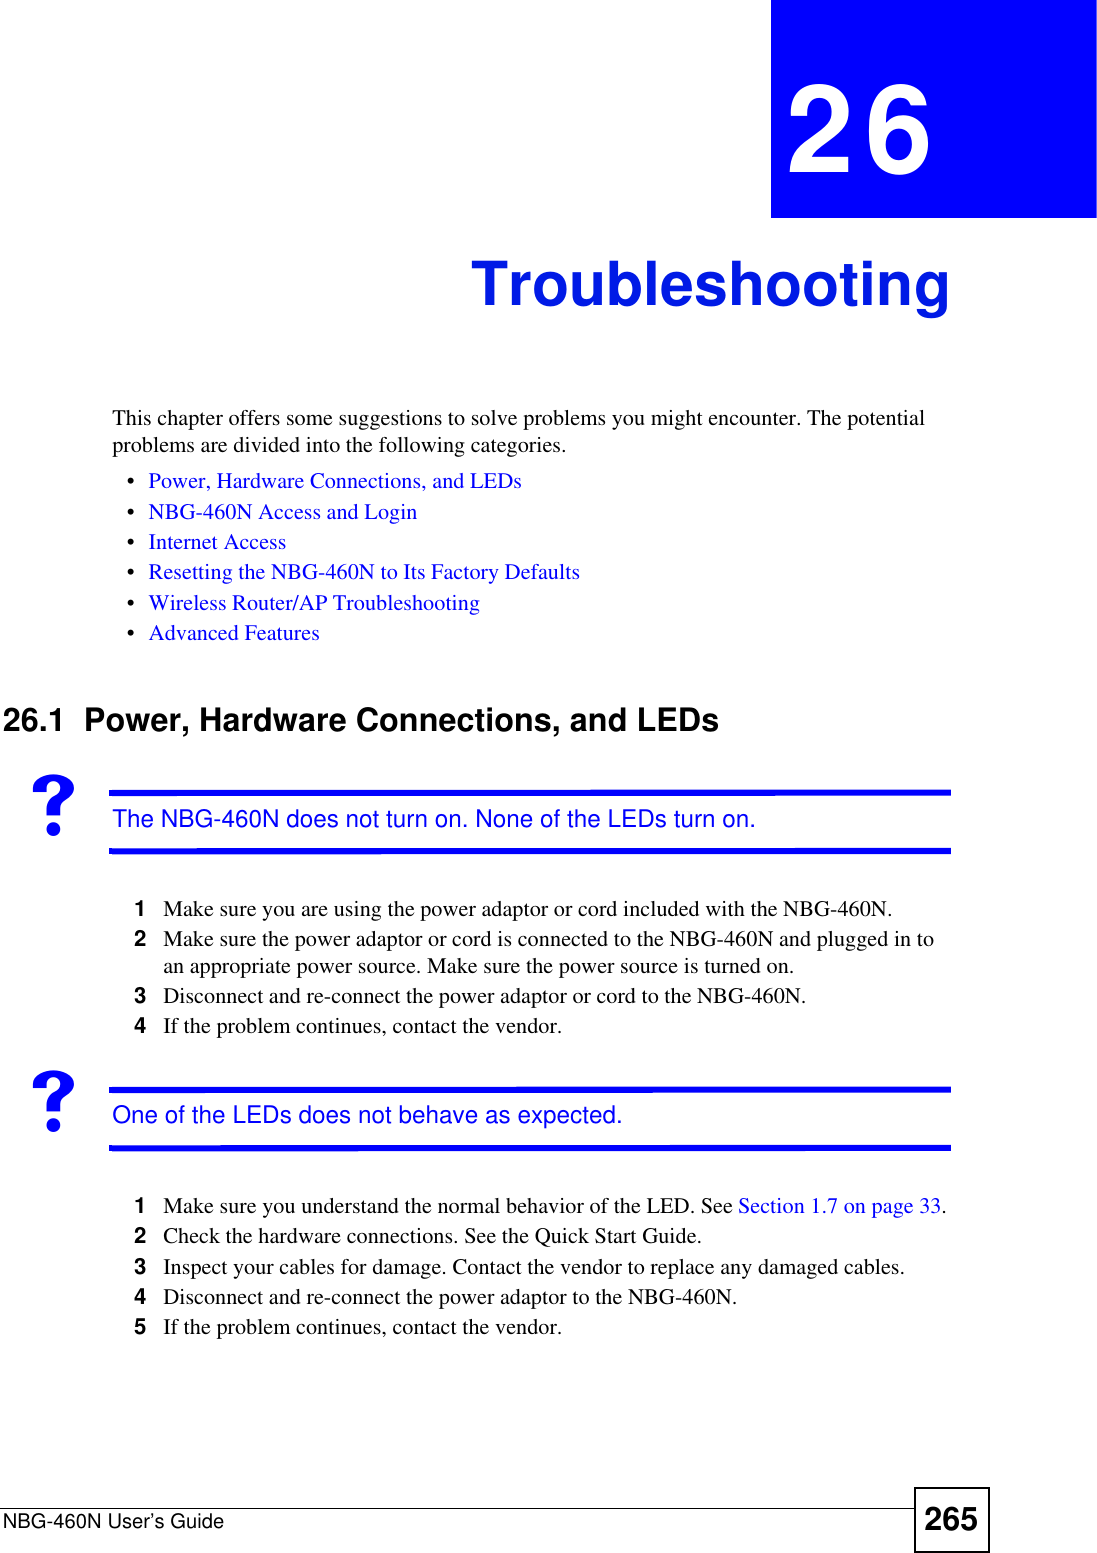 NBG-460N User’s Guide 265CHAPTER 26TroubleshootingThis chapter offers some suggestions to solve problems you might encounter. The potential problems are divided into the following categories. •Power, Hardware Connections, and LEDs•NBG-460N Access and Login•Internet Access•Resetting the NBG-460N to Its Factory Defaults•Wireless Router/AP Troubleshooting•Advanced Features26.1  Power, Hardware Connections, and LEDsVThe NBG-460N does not turn on. None of the LEDs turn on.1Make sure you are using the power adaptor or cord included with the NBG-460N.2Make sure the power adaptor or cord is connected to the NBG-460N and plugged in to an appropriate power source. Make sure the power source is turned on.3Disconnect and re-connect the power adaptor or cord to the NBG-460N.4If the problem continues, contact the vendor.VOne of the LEDs does not behave as expected.1Make sure you understand the normal behavior of the LED. See Section 1.7 on page 33.2Check the hardware connections. See the Quick Start Guide. 3Inspect your cables for damage. Contact the vendor to replace any damaged cables.4Disconnect and re-connect the power adaptor to the NBG-460N. 5If the problem continues, contact the vendor.